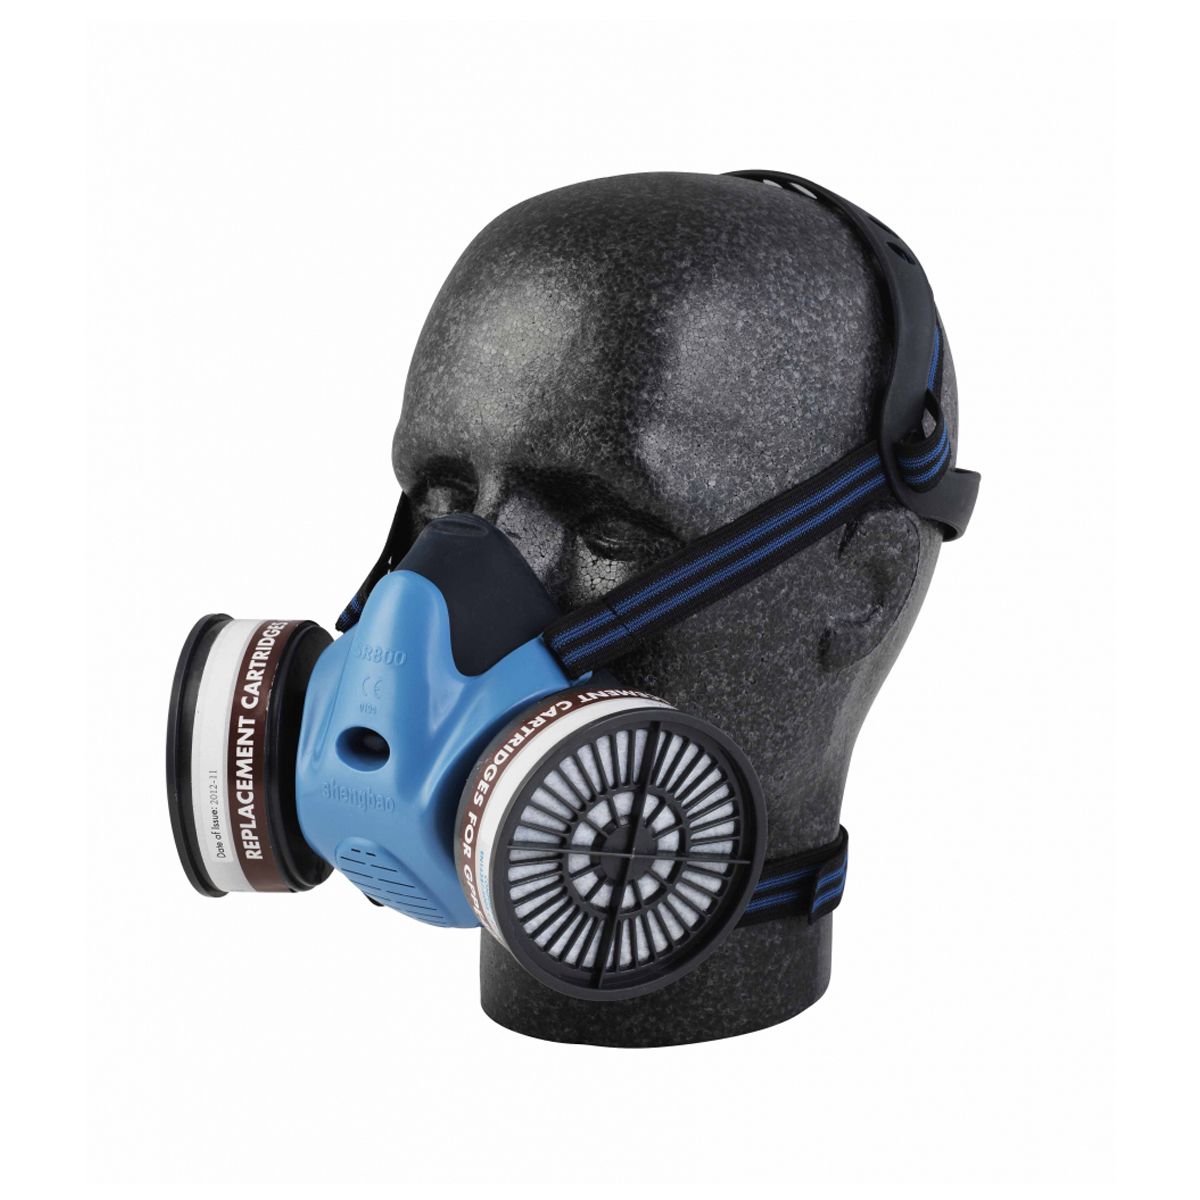 Glenwear Twin Filter Respirator Dust Mask with 2 Cartridges